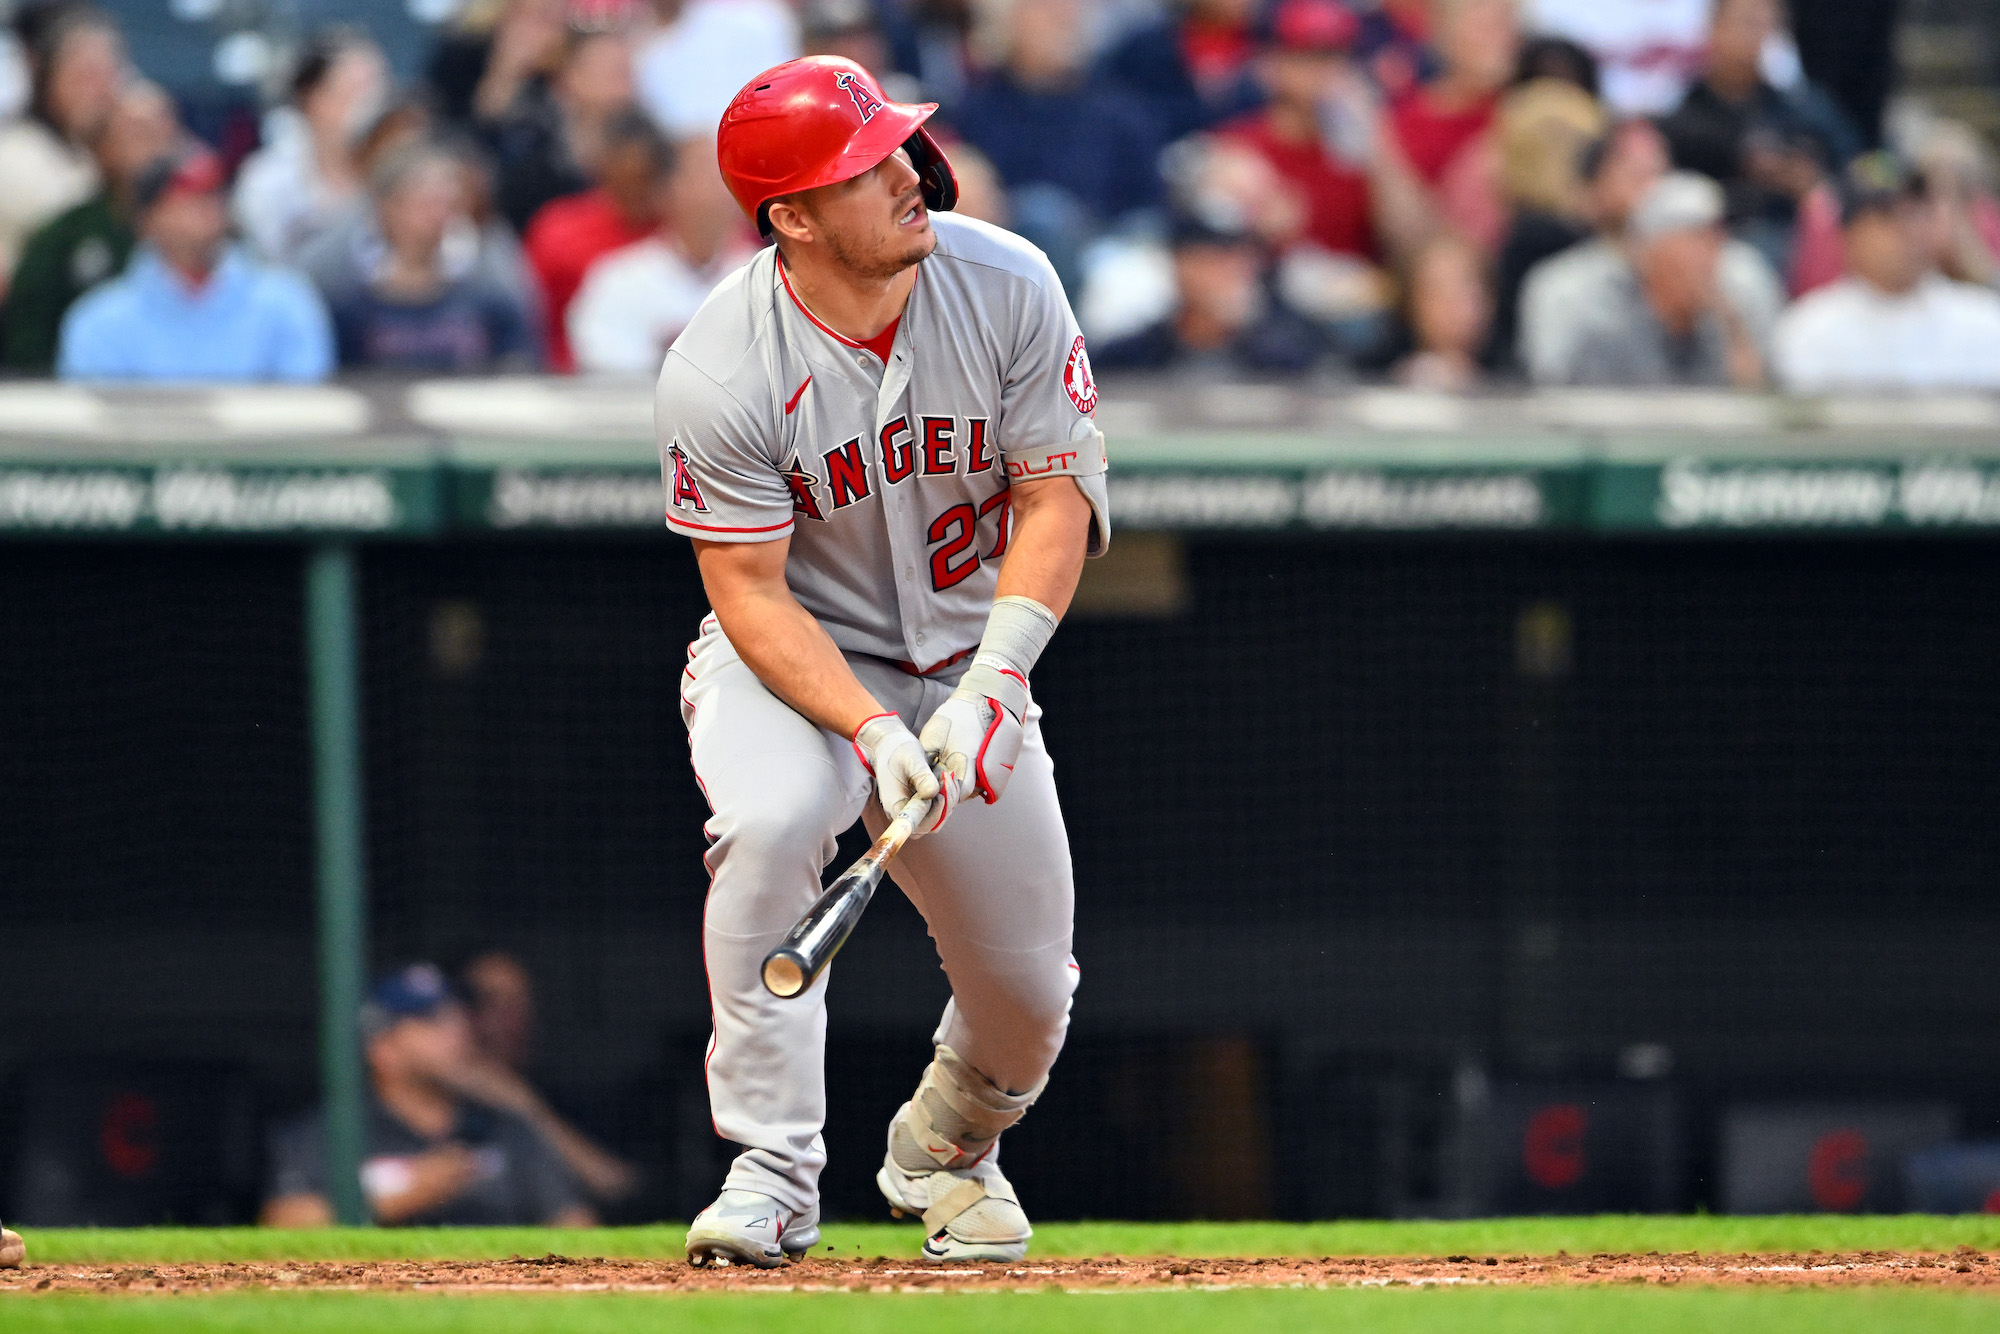 CLEVELAND, OHIO - SEPTEMBER 12: Mike Trout #27 of the Los Angeles Angels hits a two-run homer during the fifth inning against the Cleveland Guardians at Progressive Field on September 12, 2022 in Cleveland, Ohio. (Photo by Jason Miller/Getty Images)